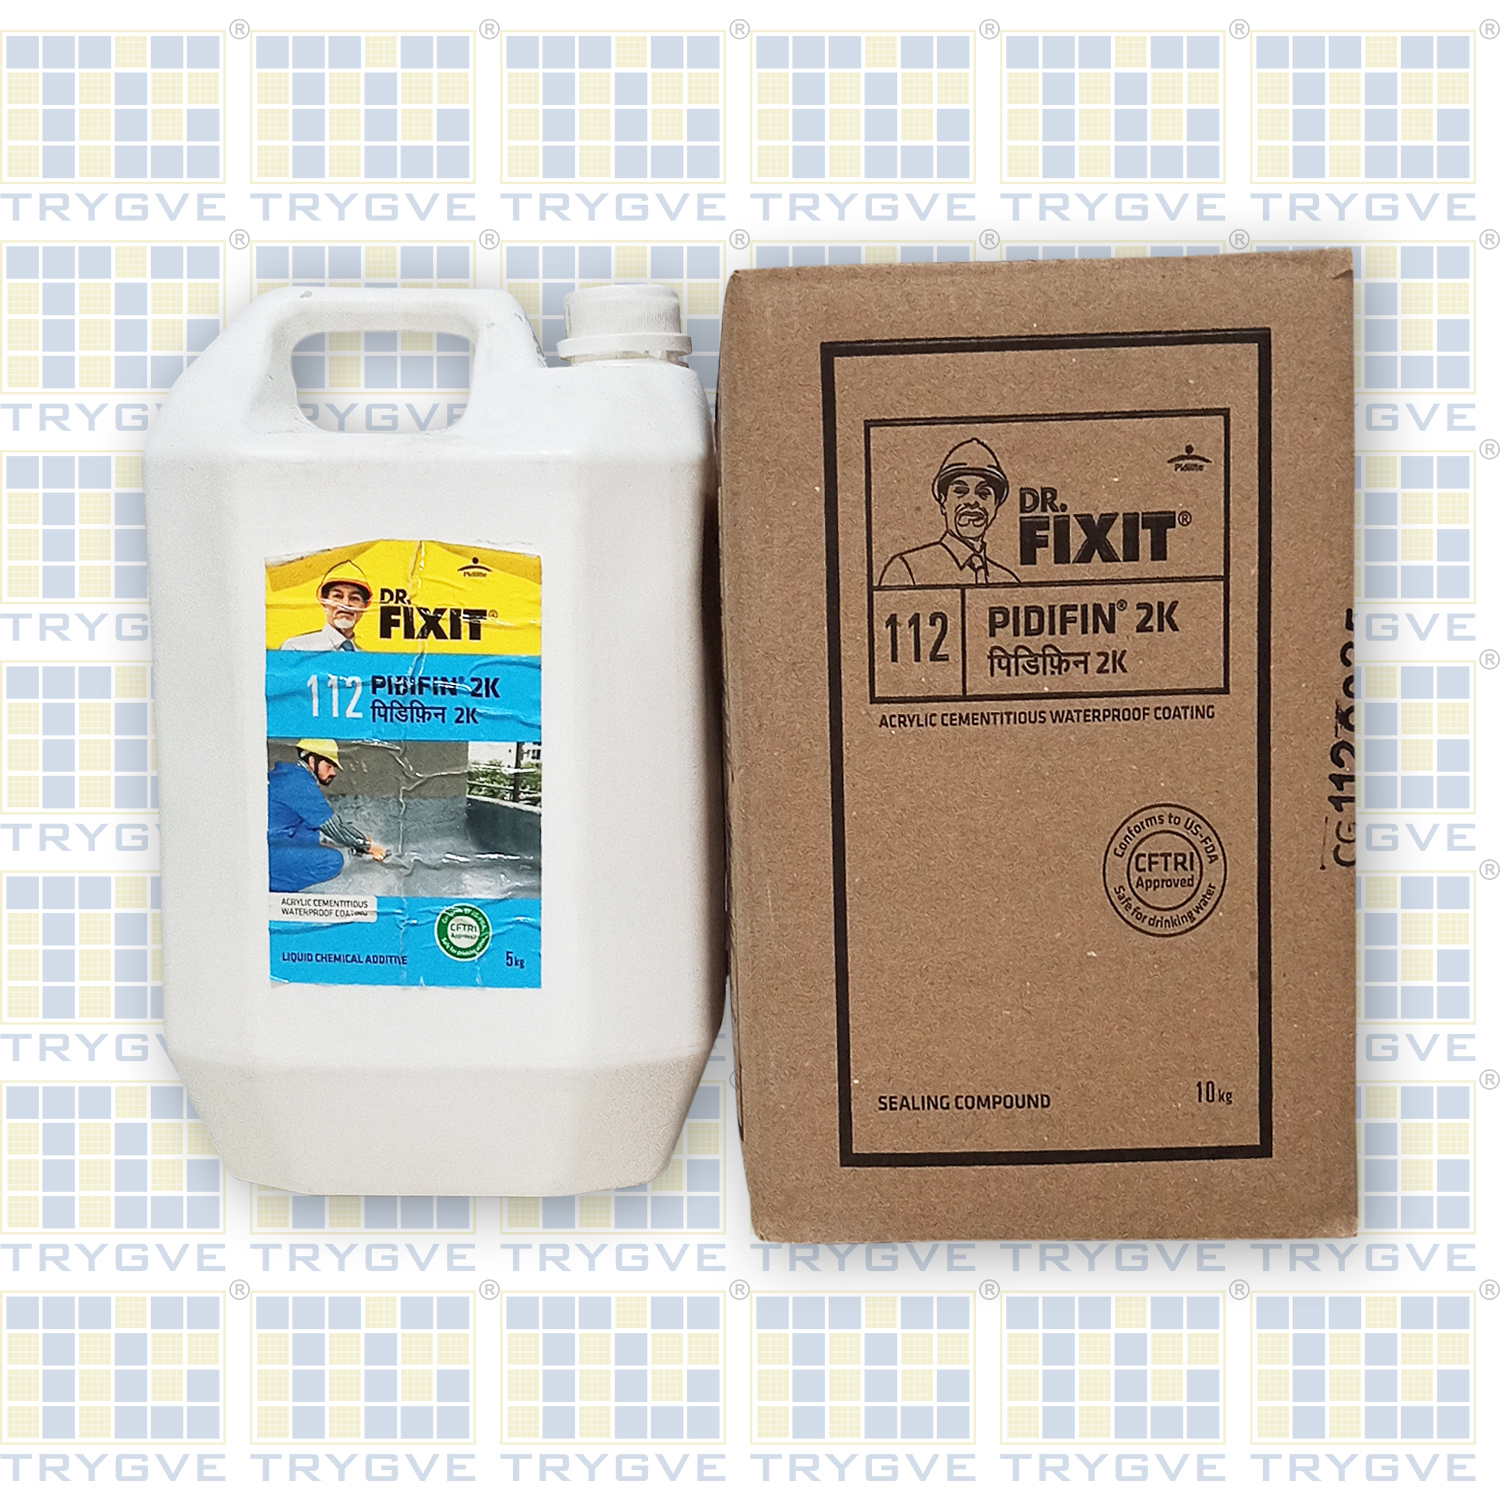 Dr. Fixit 112 Pidifin 2K 15 Kg Waterproof Chemicals